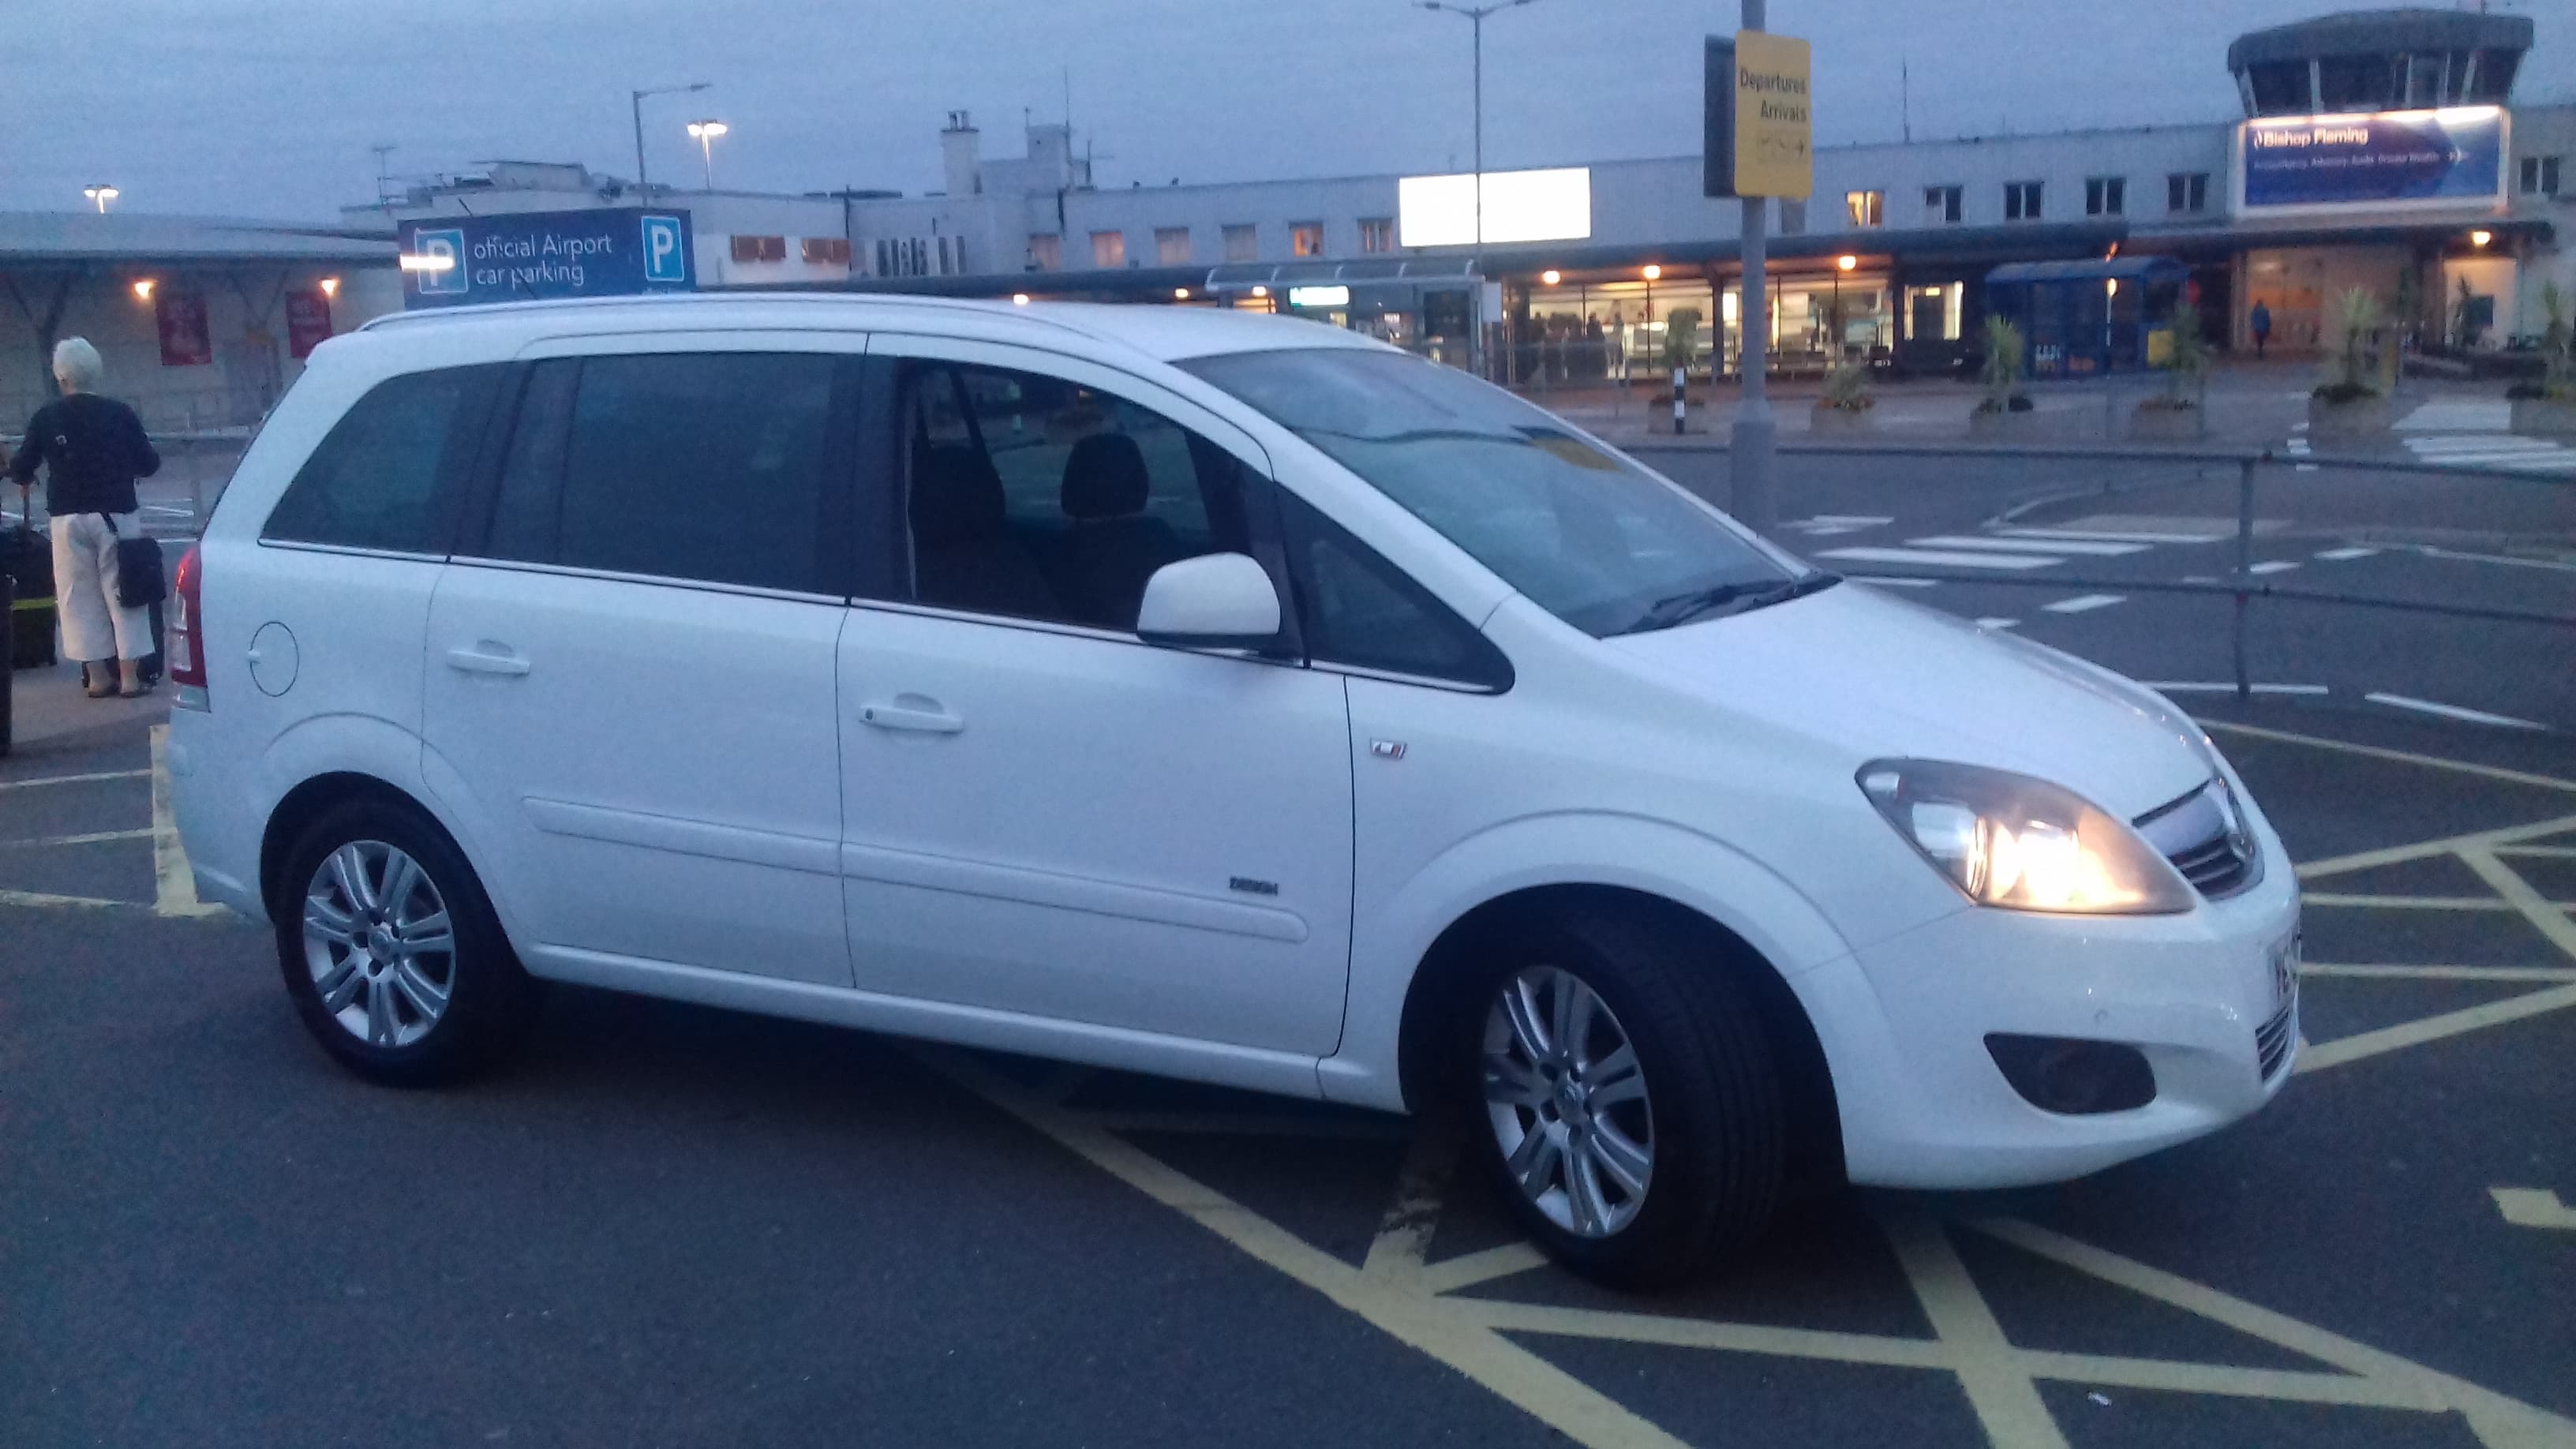 Our MPV at the airport for an airport transfer